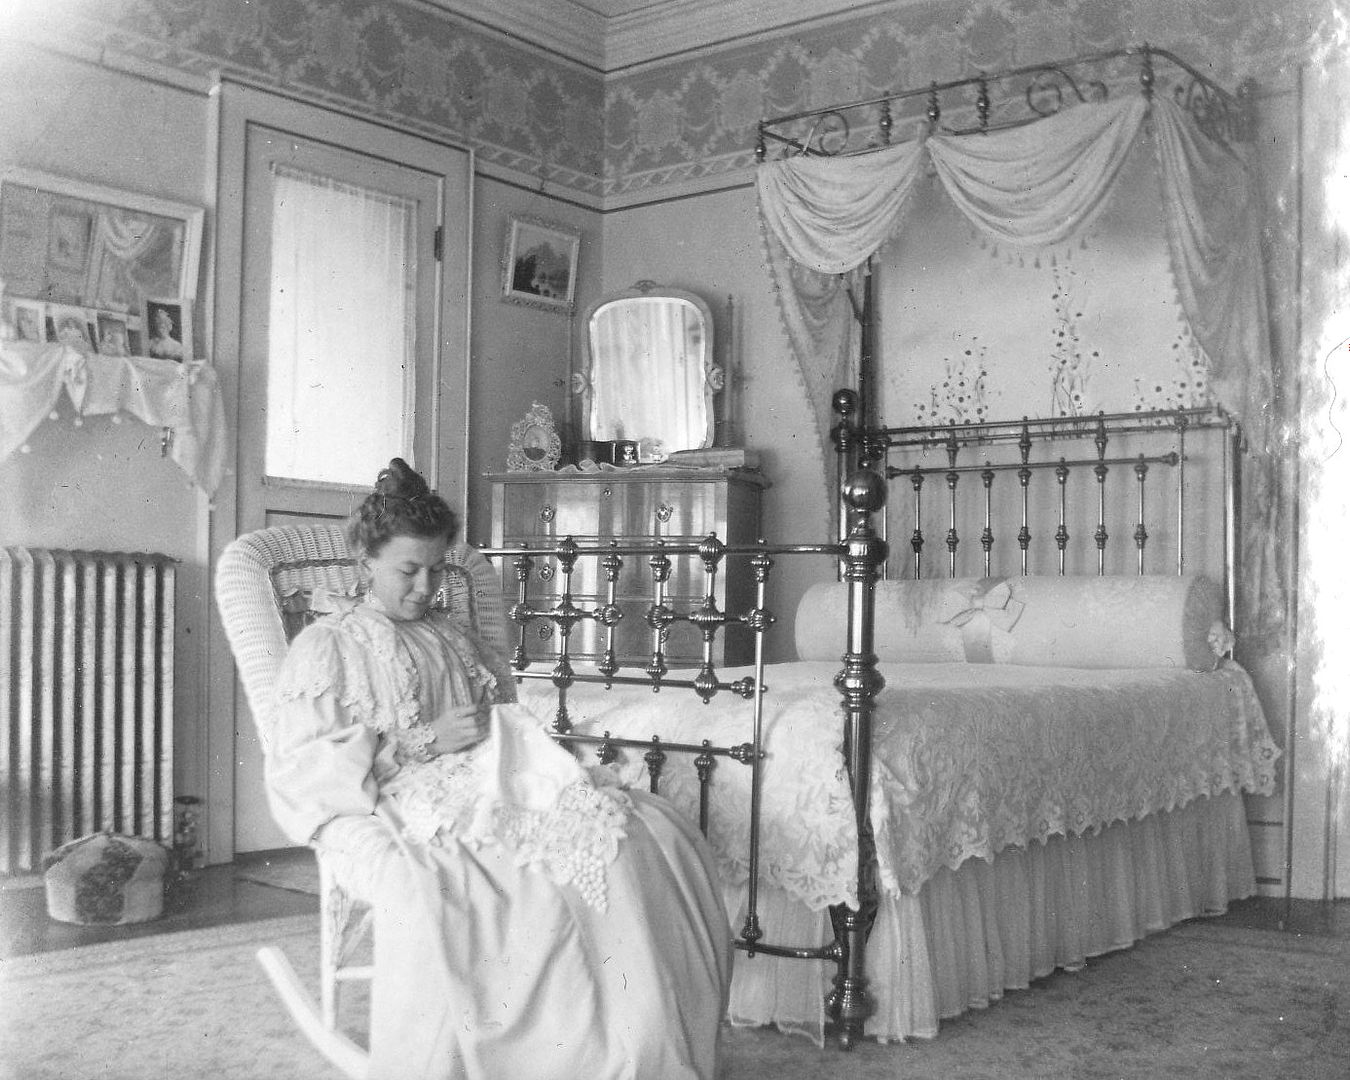 Addie in her bedroom at the Fargo Mansion.